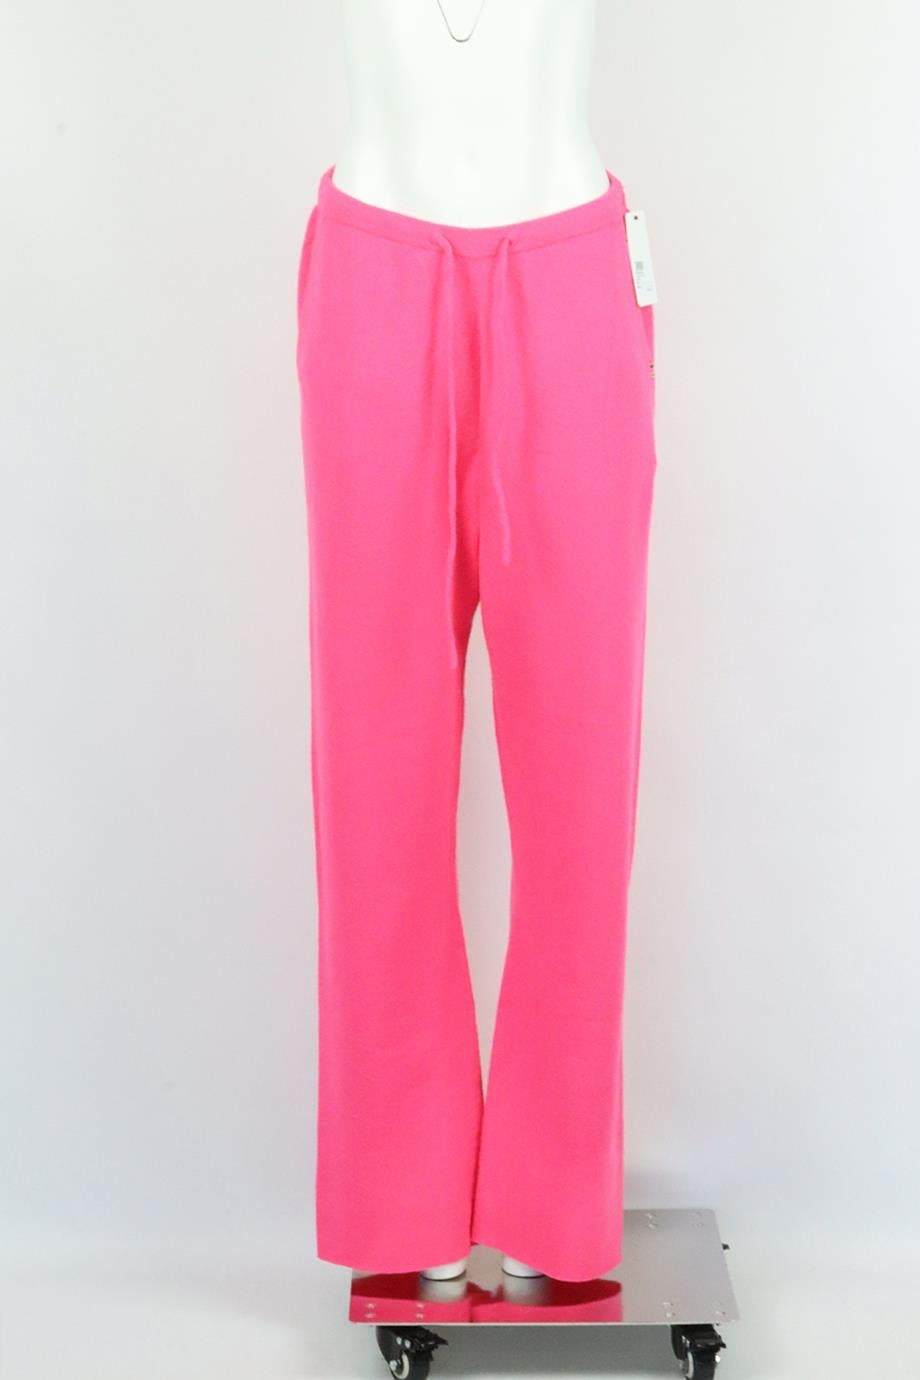 Extreme Cashmere cashmere blend wide leg pants. Pink. Pull on. 88% Cashmere, 10% nylon, 2% spandex. Size: One Size. Waist: 29.6 in. Hips: 38.1 in. Length: 44.3 in. Inseam: 30.8 in. Rise: 14.5 in. New with tags